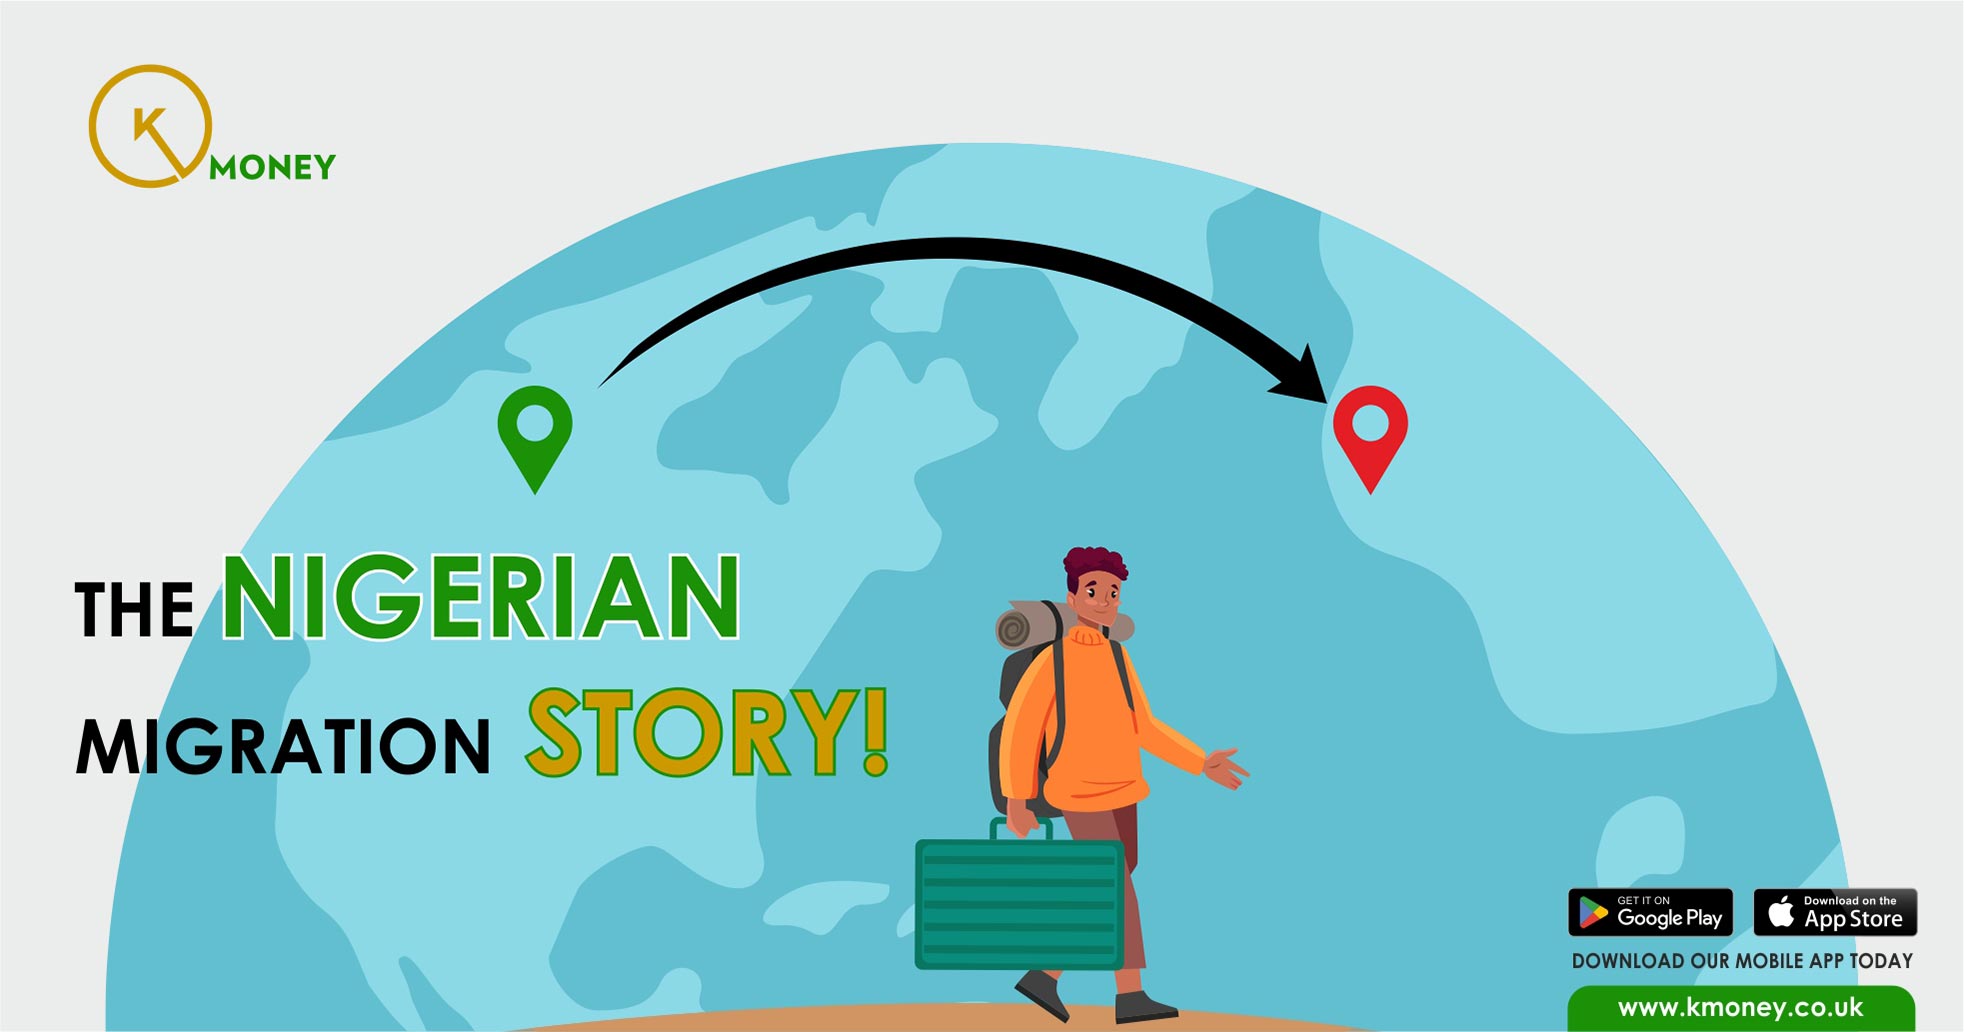 The Nigerian Migration Story